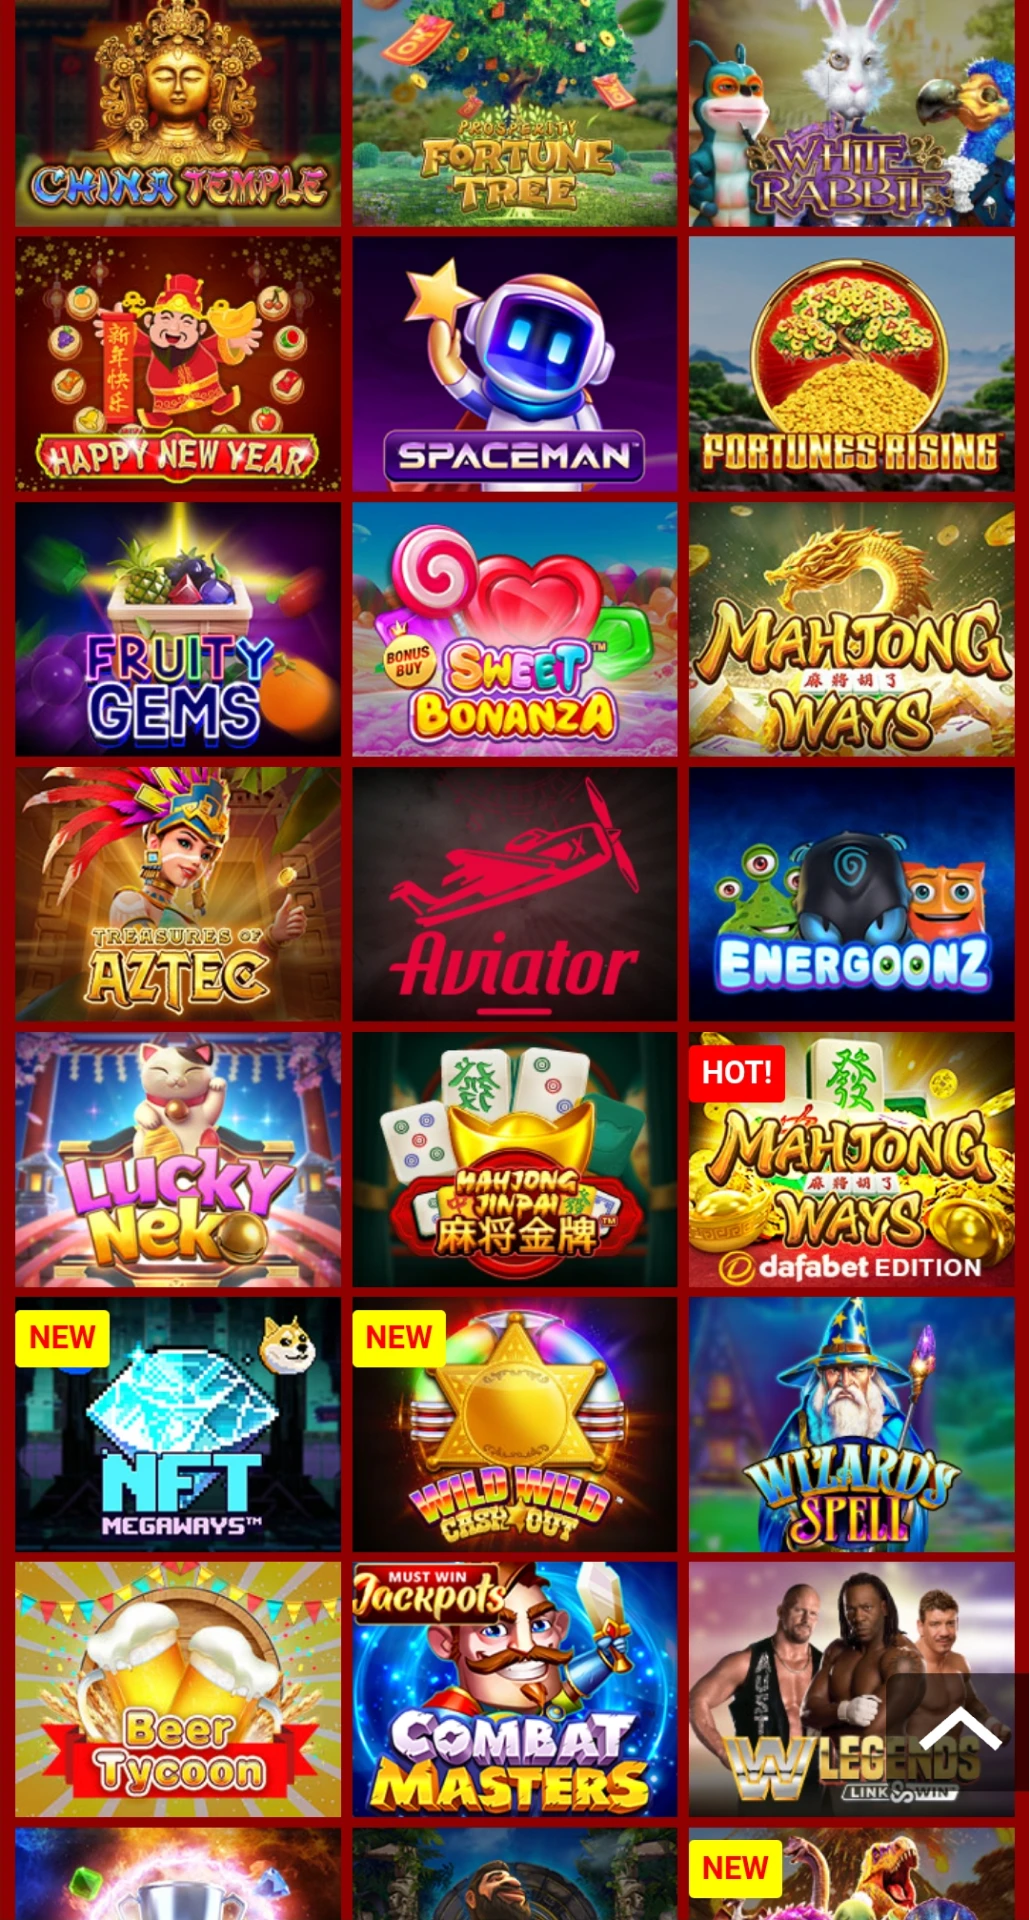 Finding the game Aviator among the many other games on Dafabet is not difficult.